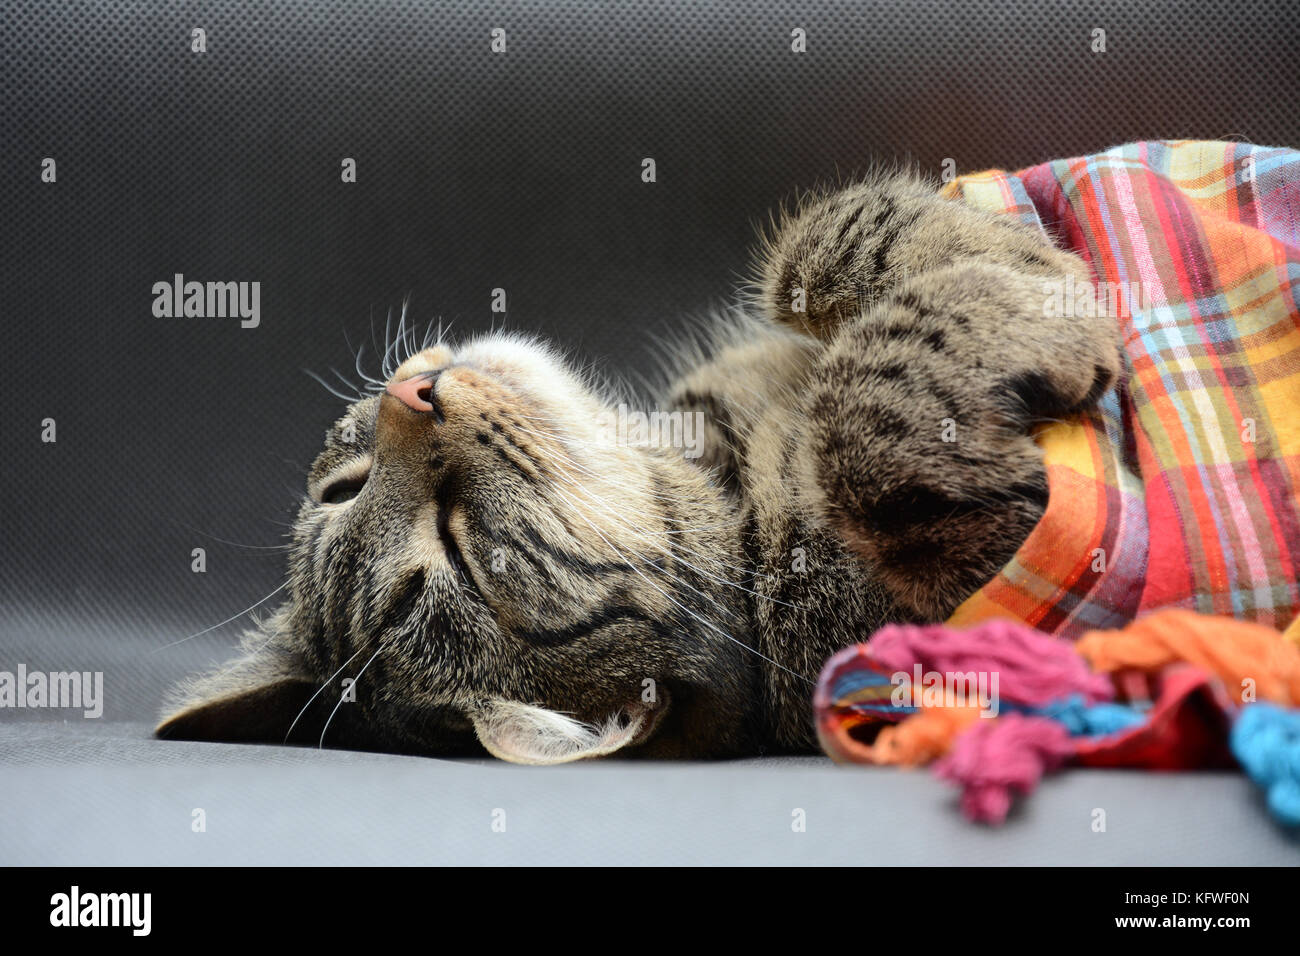 Fast asleep tabby cat covered with a colorful scarf Stock Photo